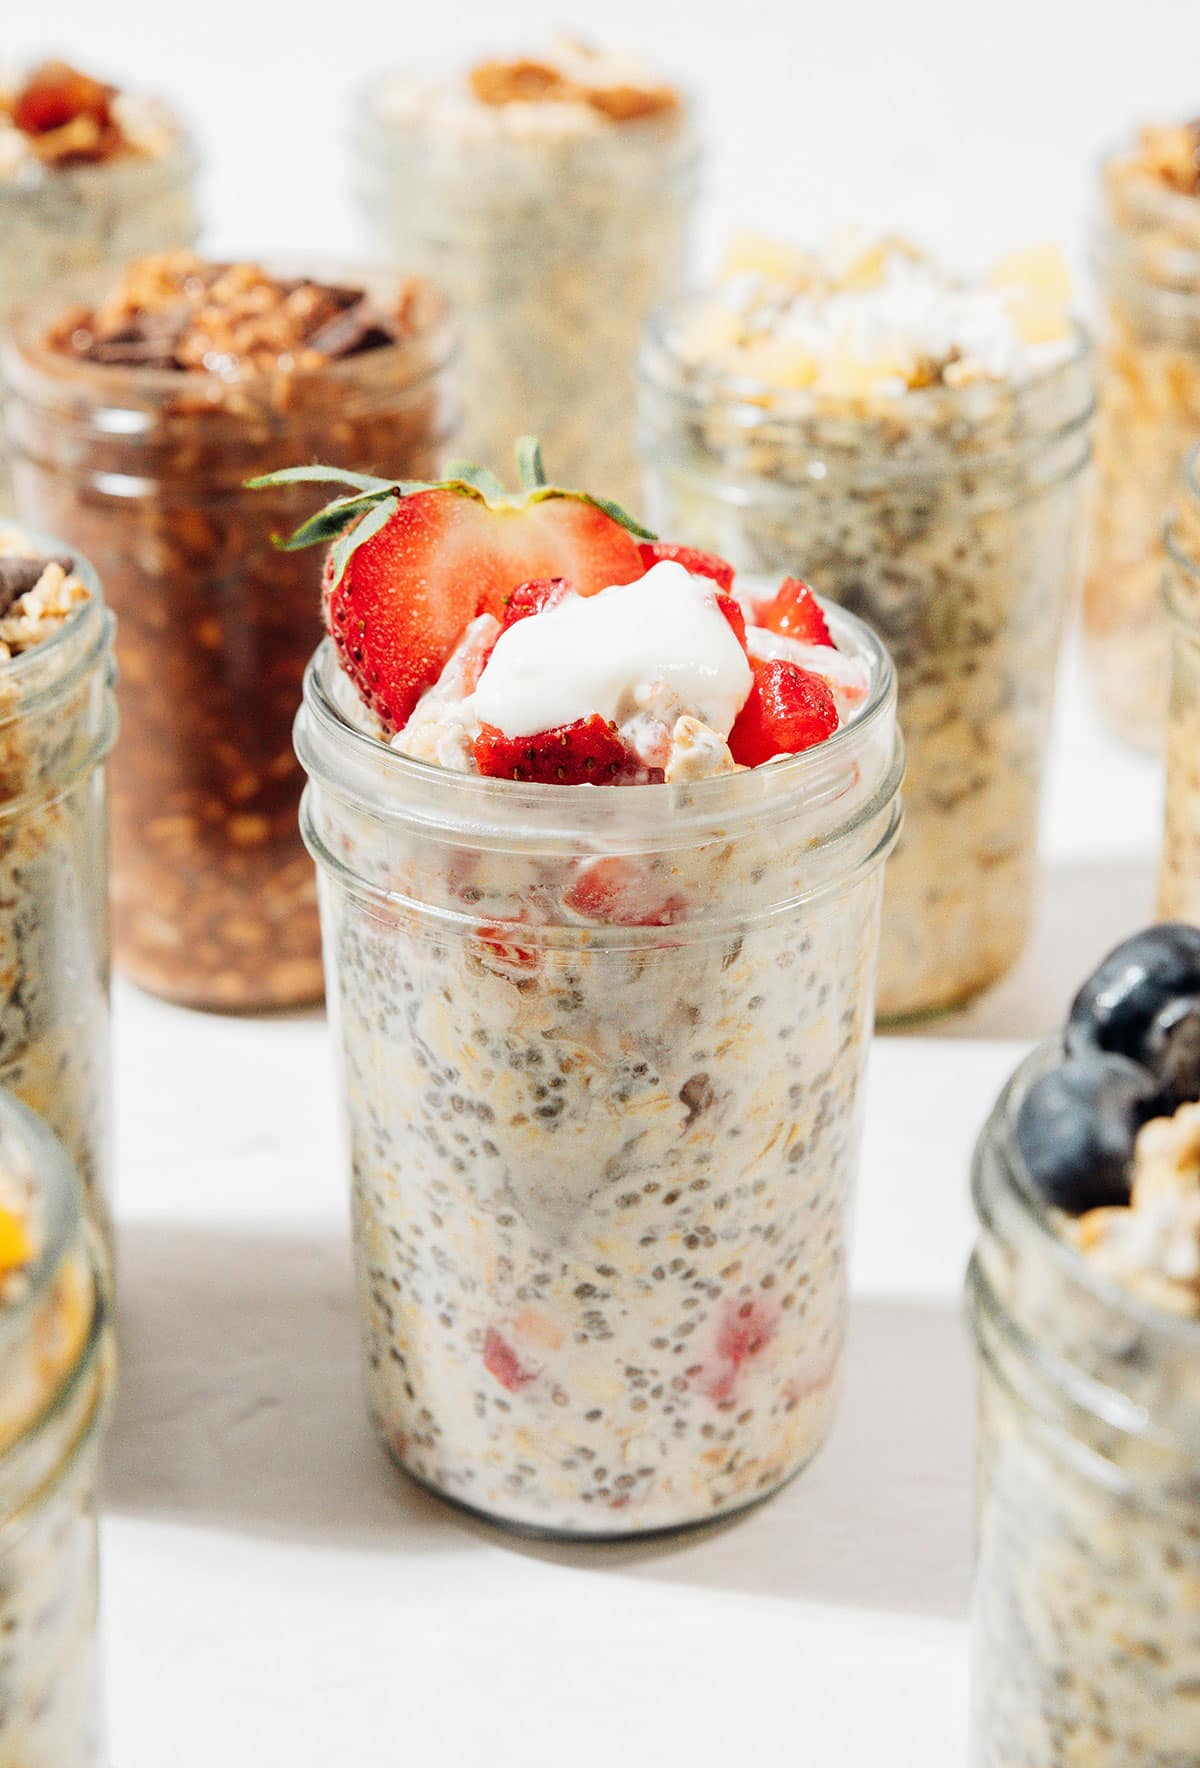 Many flavors of overnight oats.